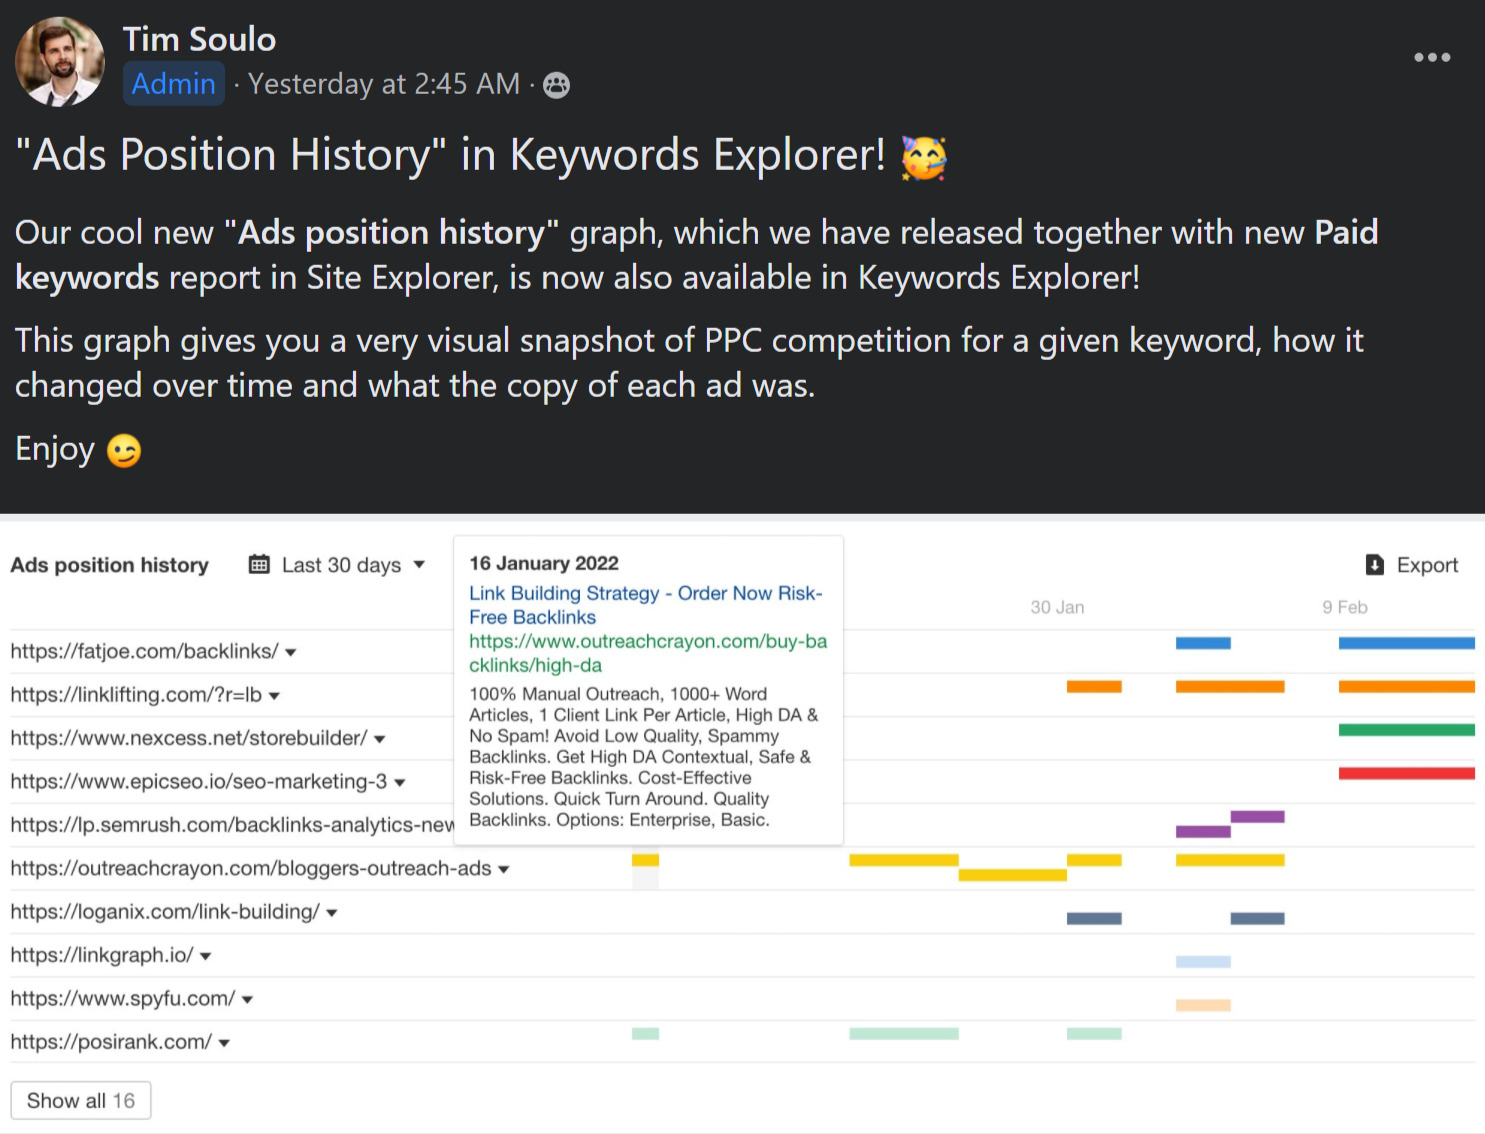 Example of community engagement: Tim's post about "ads position history" in Keywords Explorer 